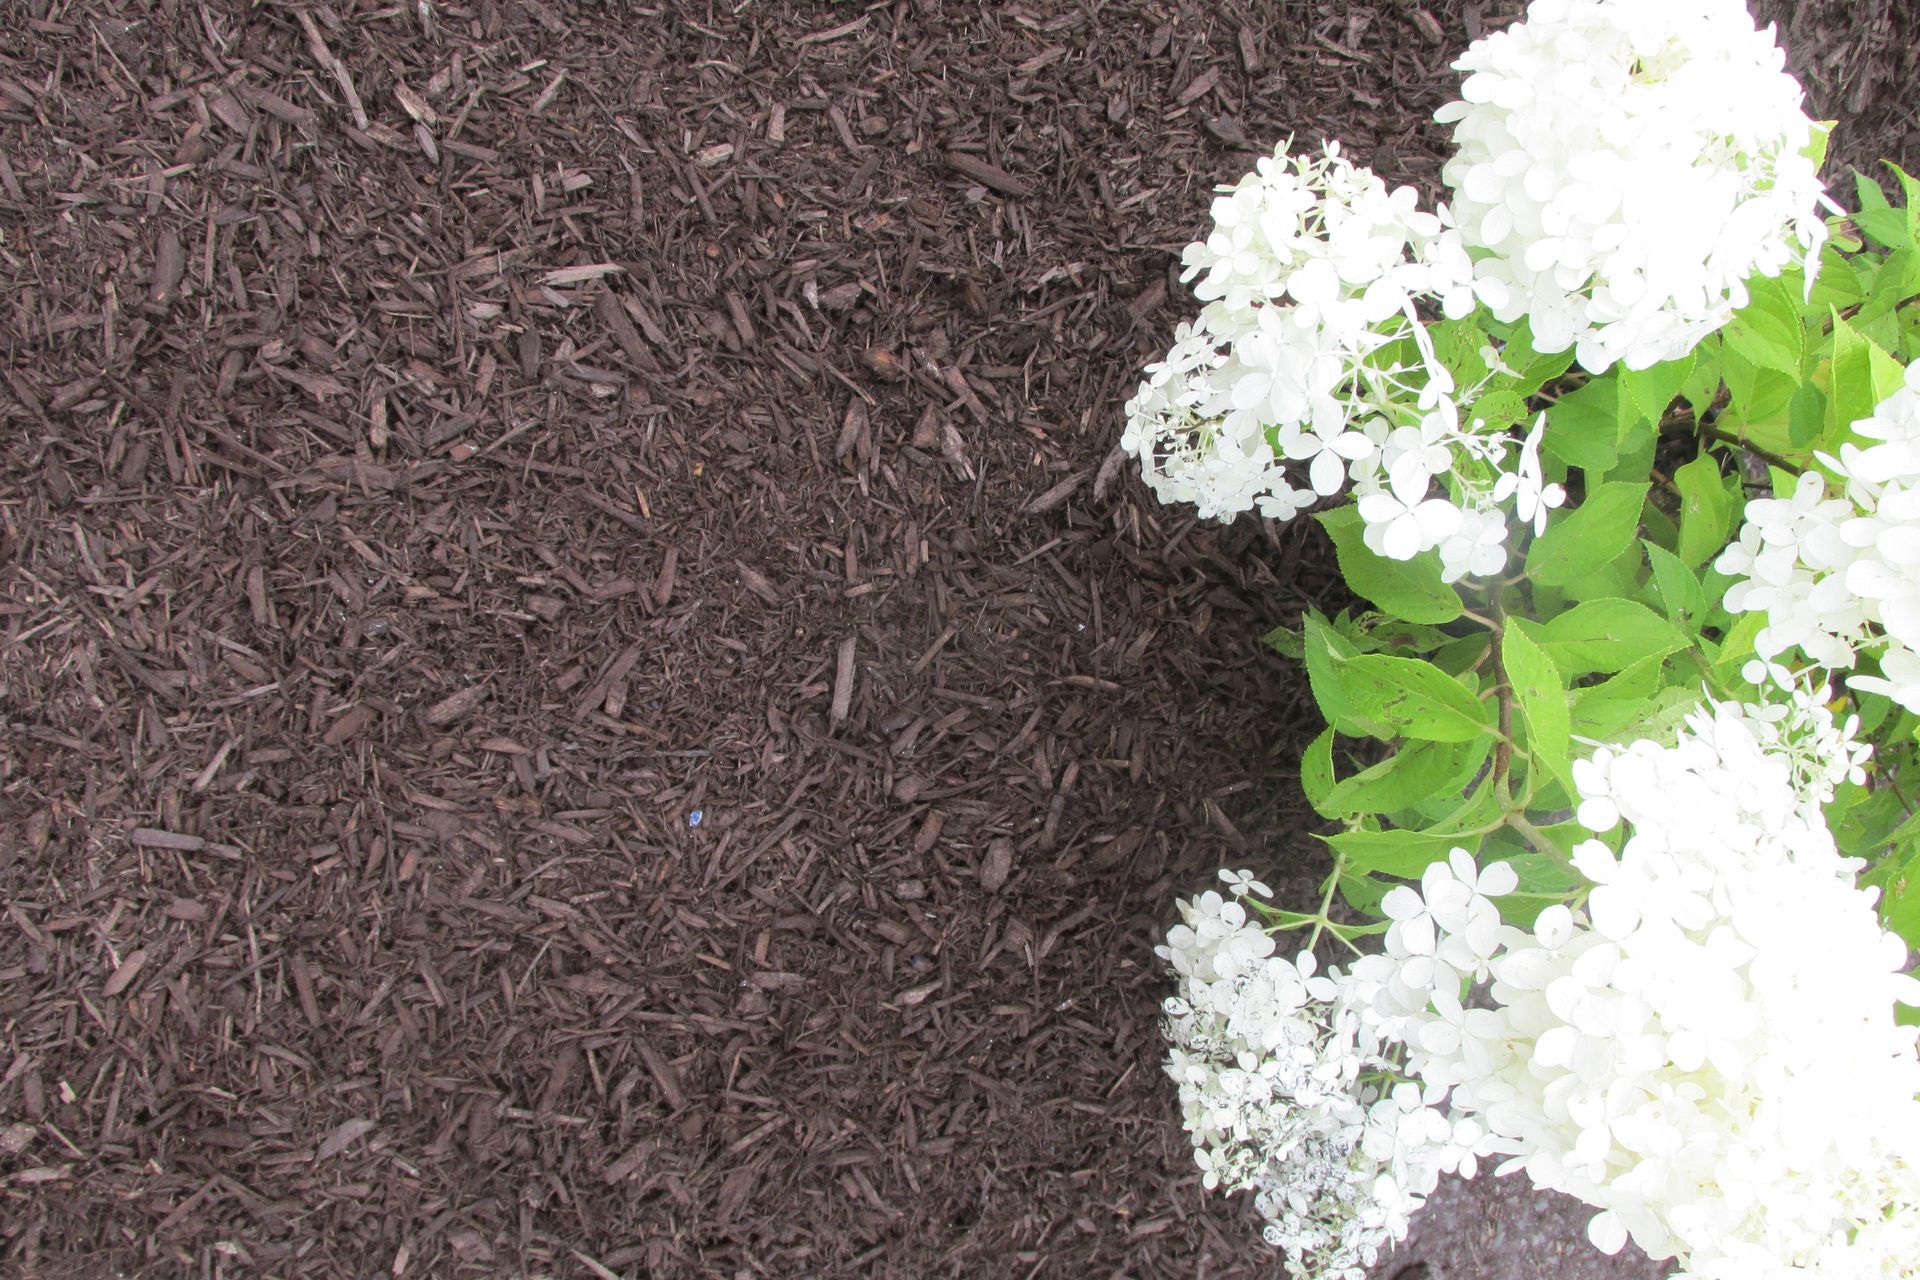 Bulk Chocolate Brown Dyed Mulch For Sale near me delivered to Lebanon, Annville, Palmyra, & Cornwall.